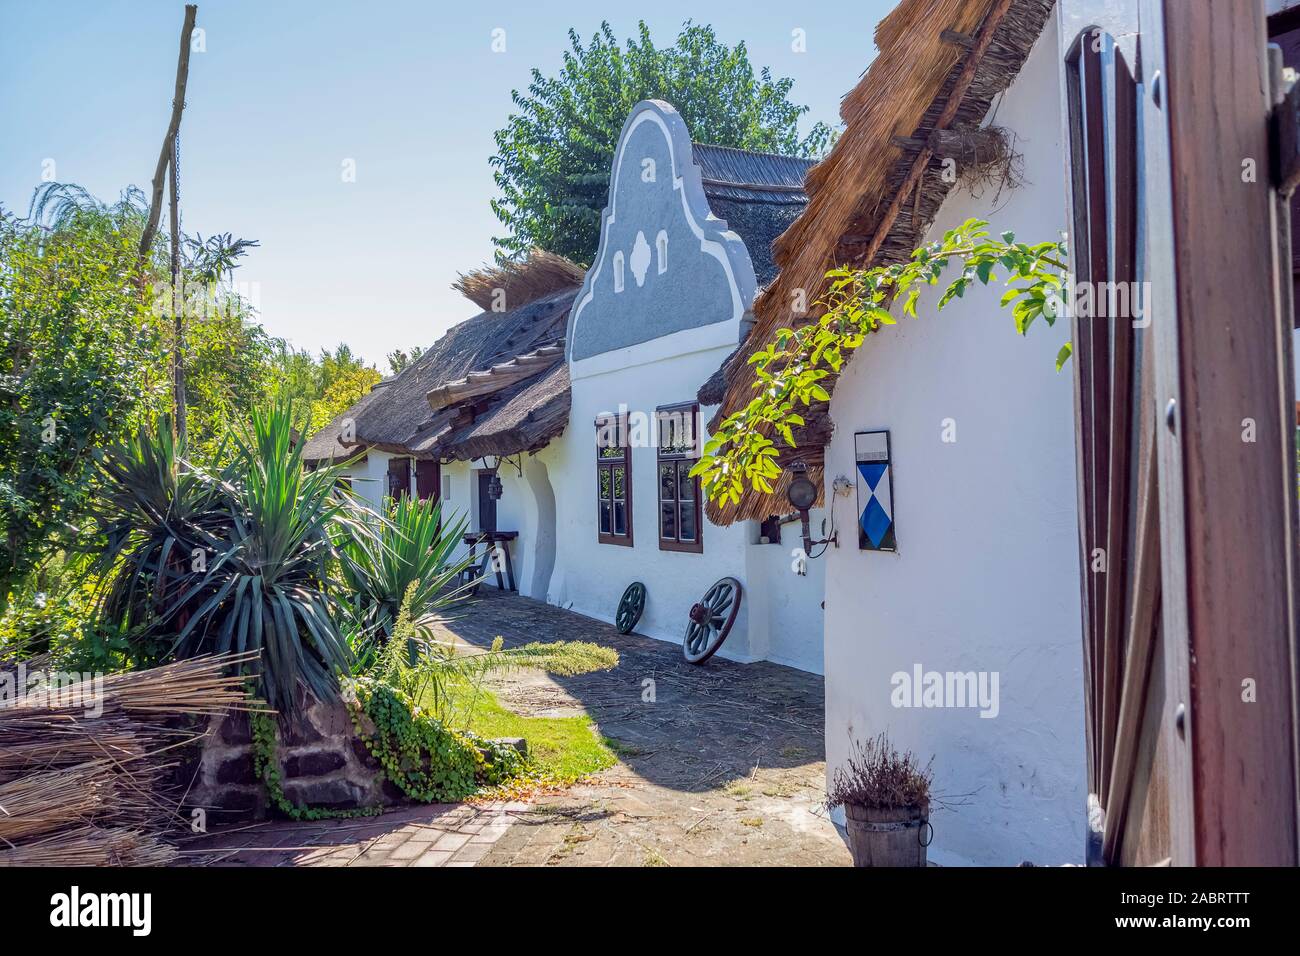 idyllic scenery with traditional houses in Apetlon, a town in a area named Burgenland in Austria Stock Photo